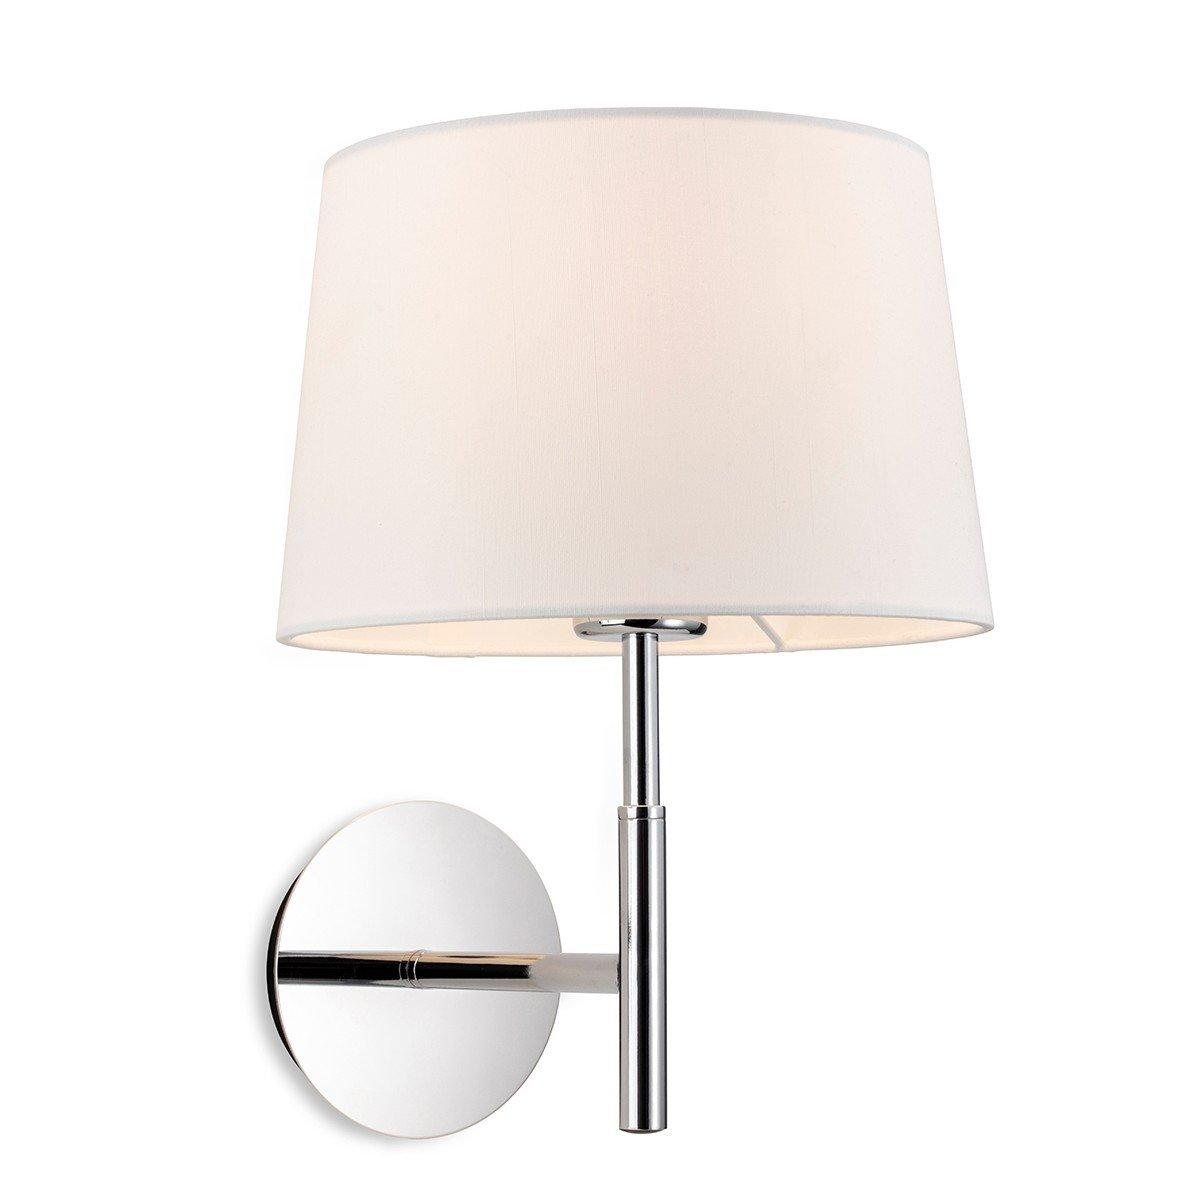 Seymour Classic Switched Wall Lamp Chrome with Cream Shade